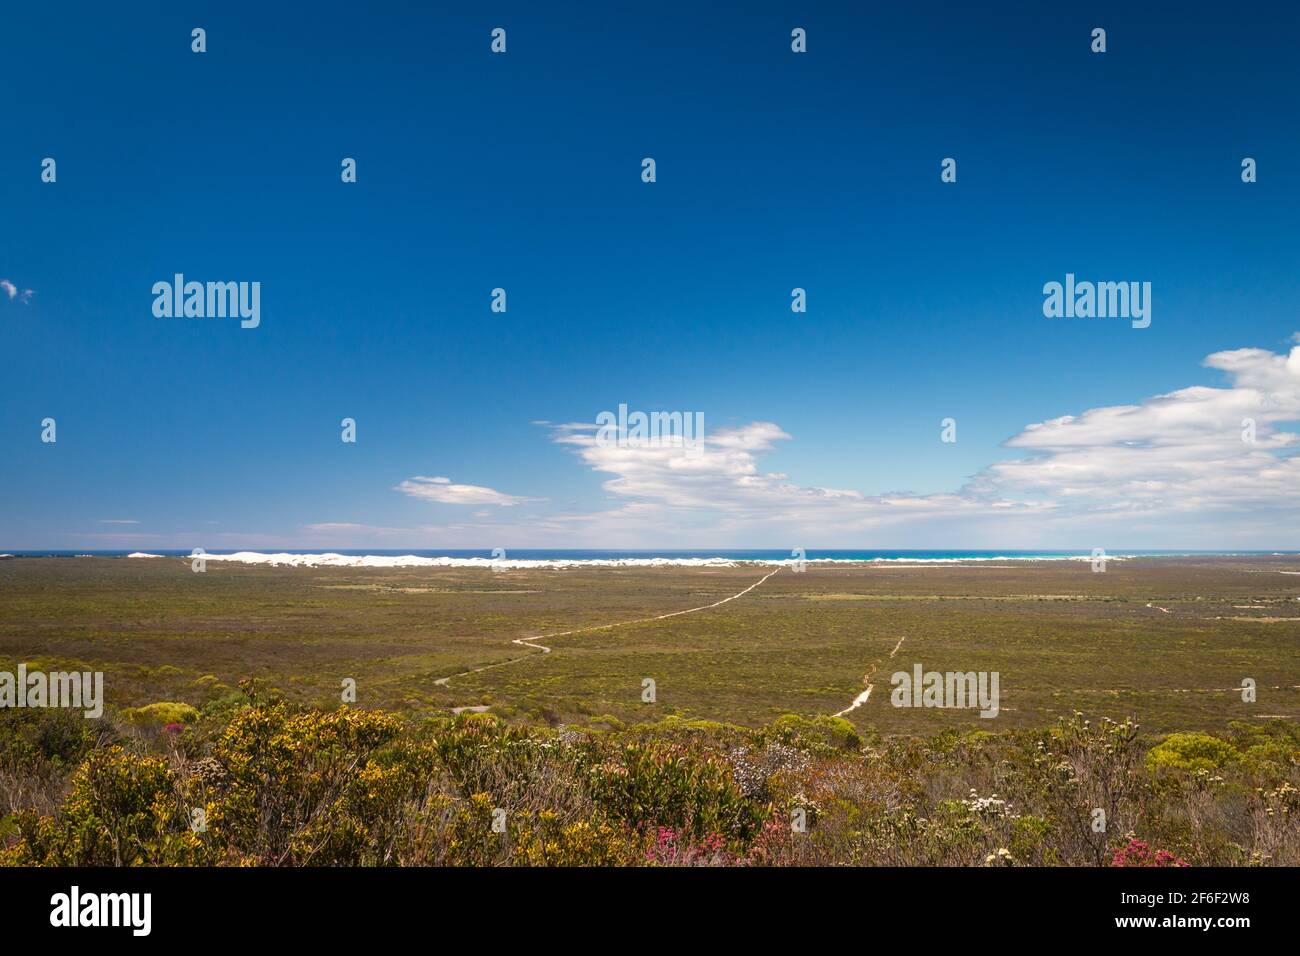 Scenic view landscape with fynbos vegetation at De Hoop nature reserve with sand dunes at Atlantic Ocean coast, South Africa against sky Stock Photo